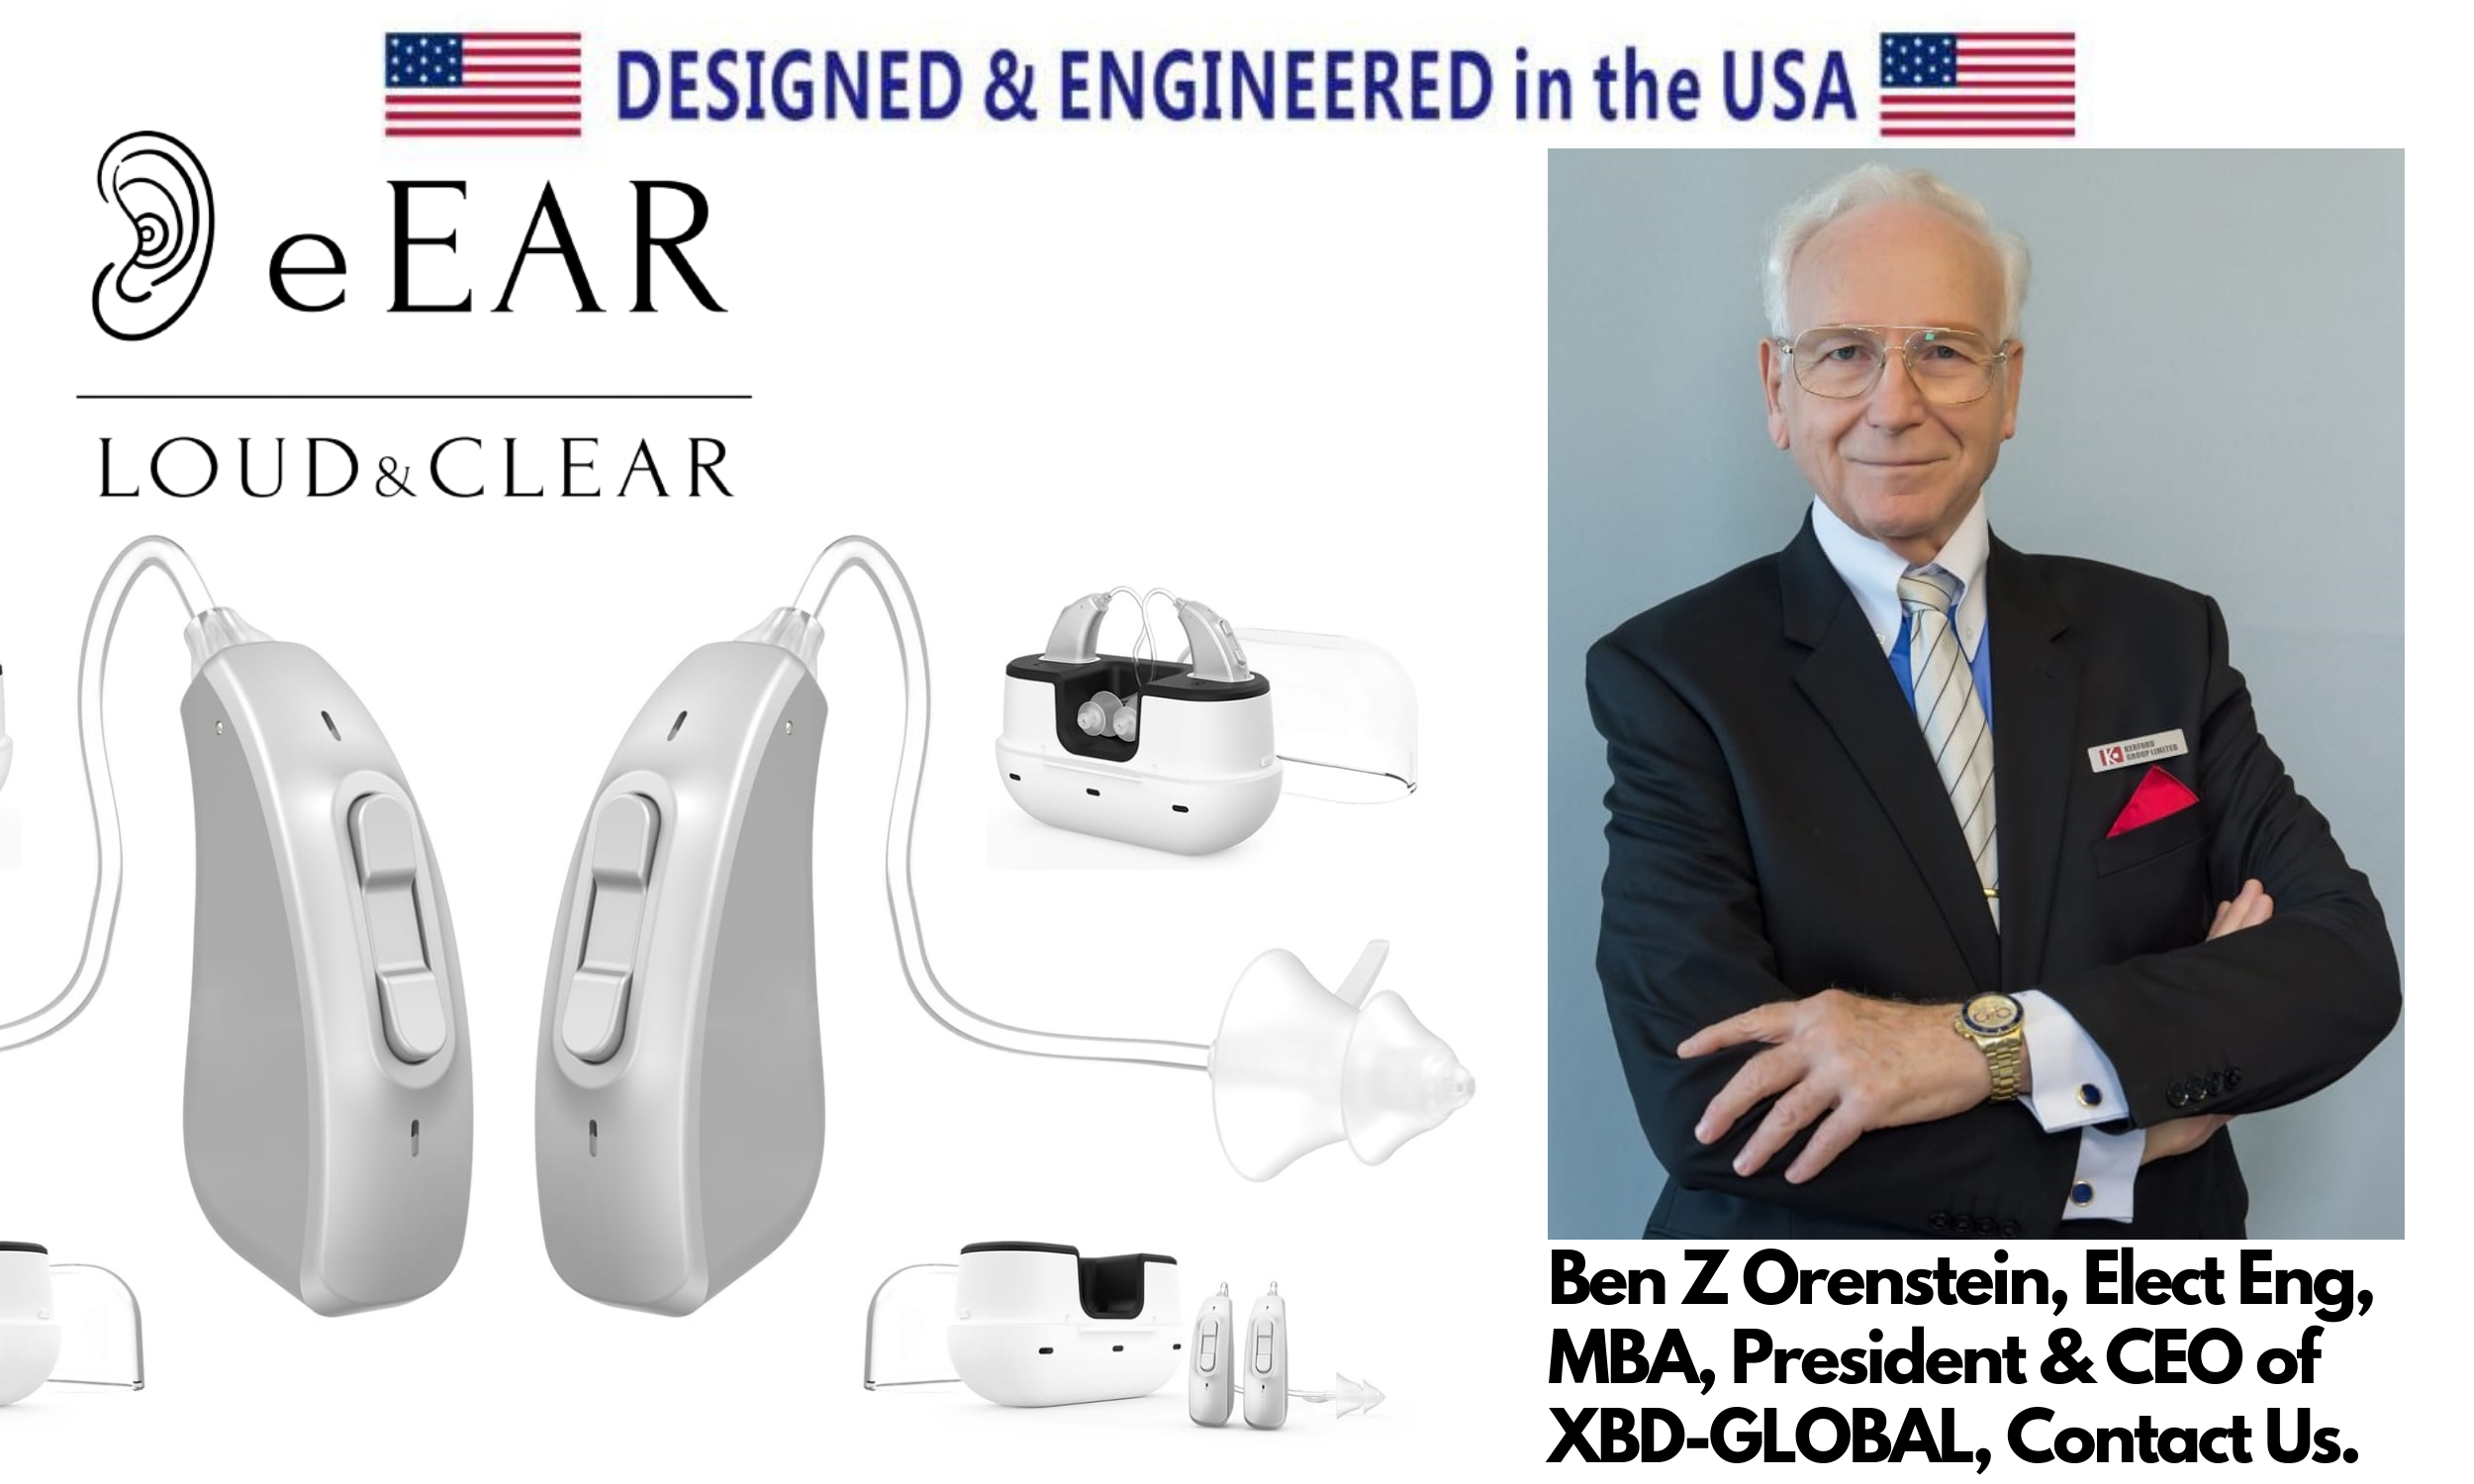 Pair of eEAR® BTE H4 Rechargeable Hearing Aid Amplifier, Digital BTE Hearing Technology Designed and Engineered in the USA | Sold 10,000+